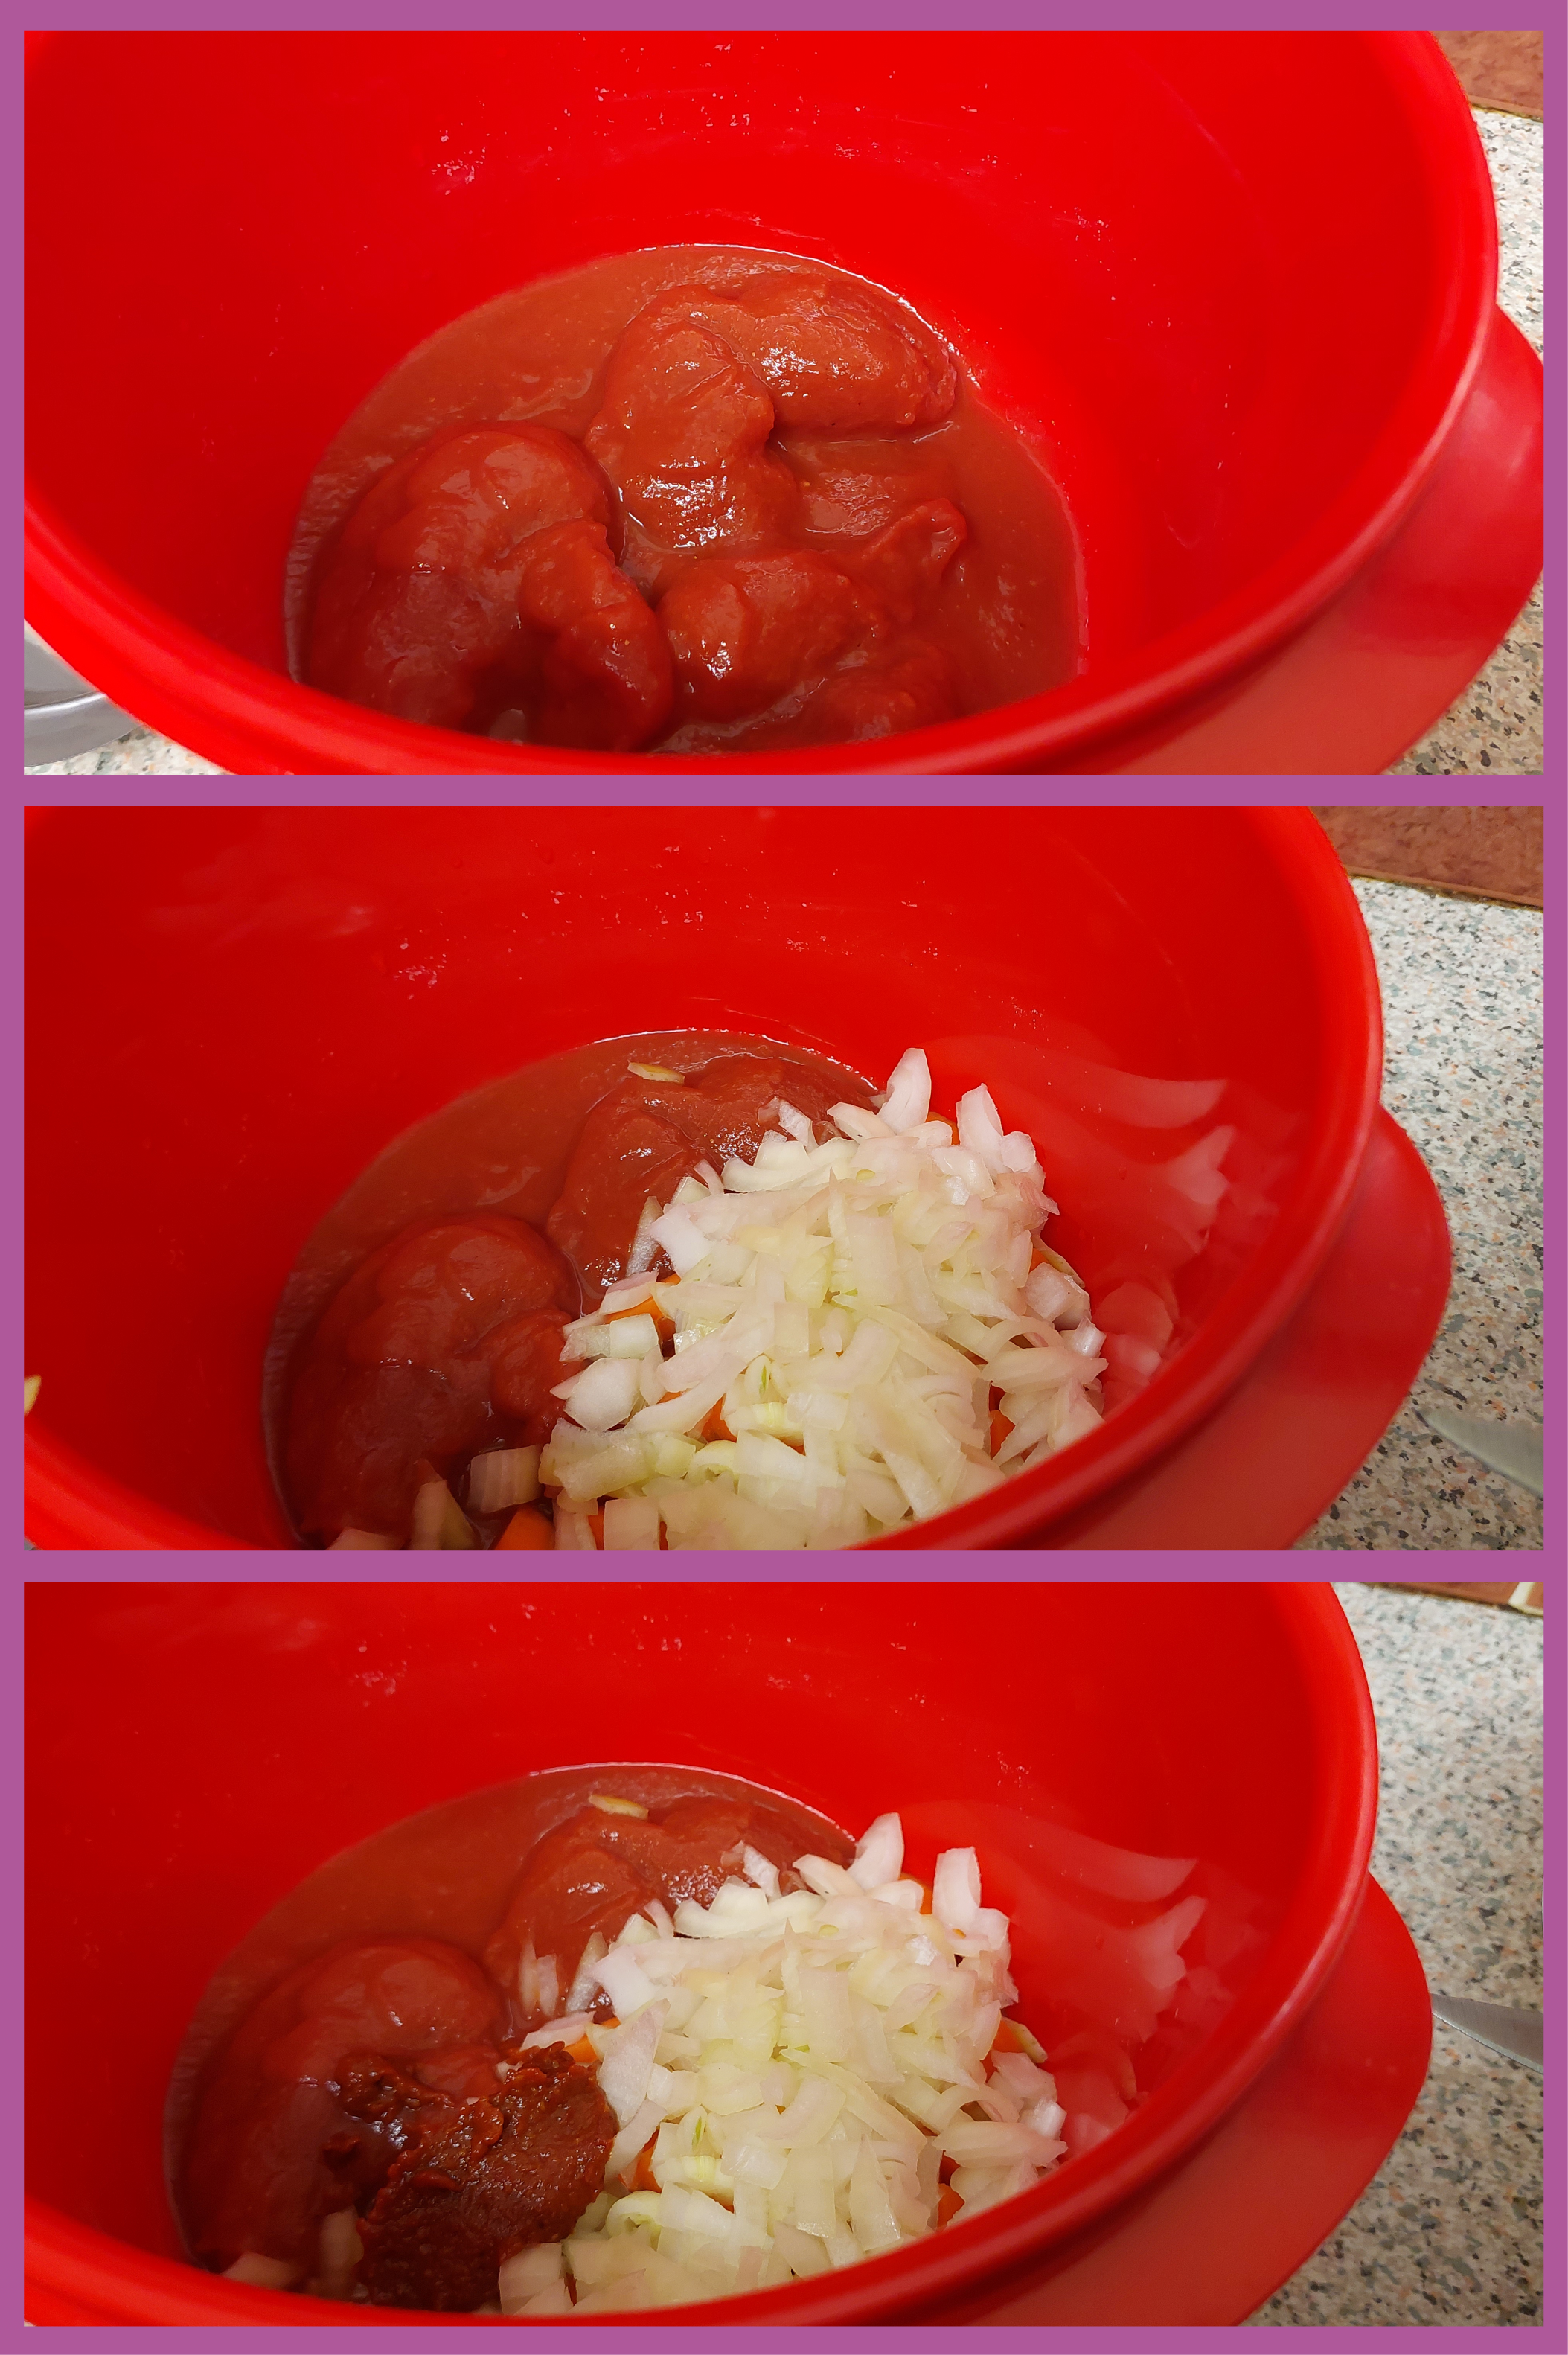 Adding, tinned tomatoes, chopped onions, carrots and harissa to a microwave dish